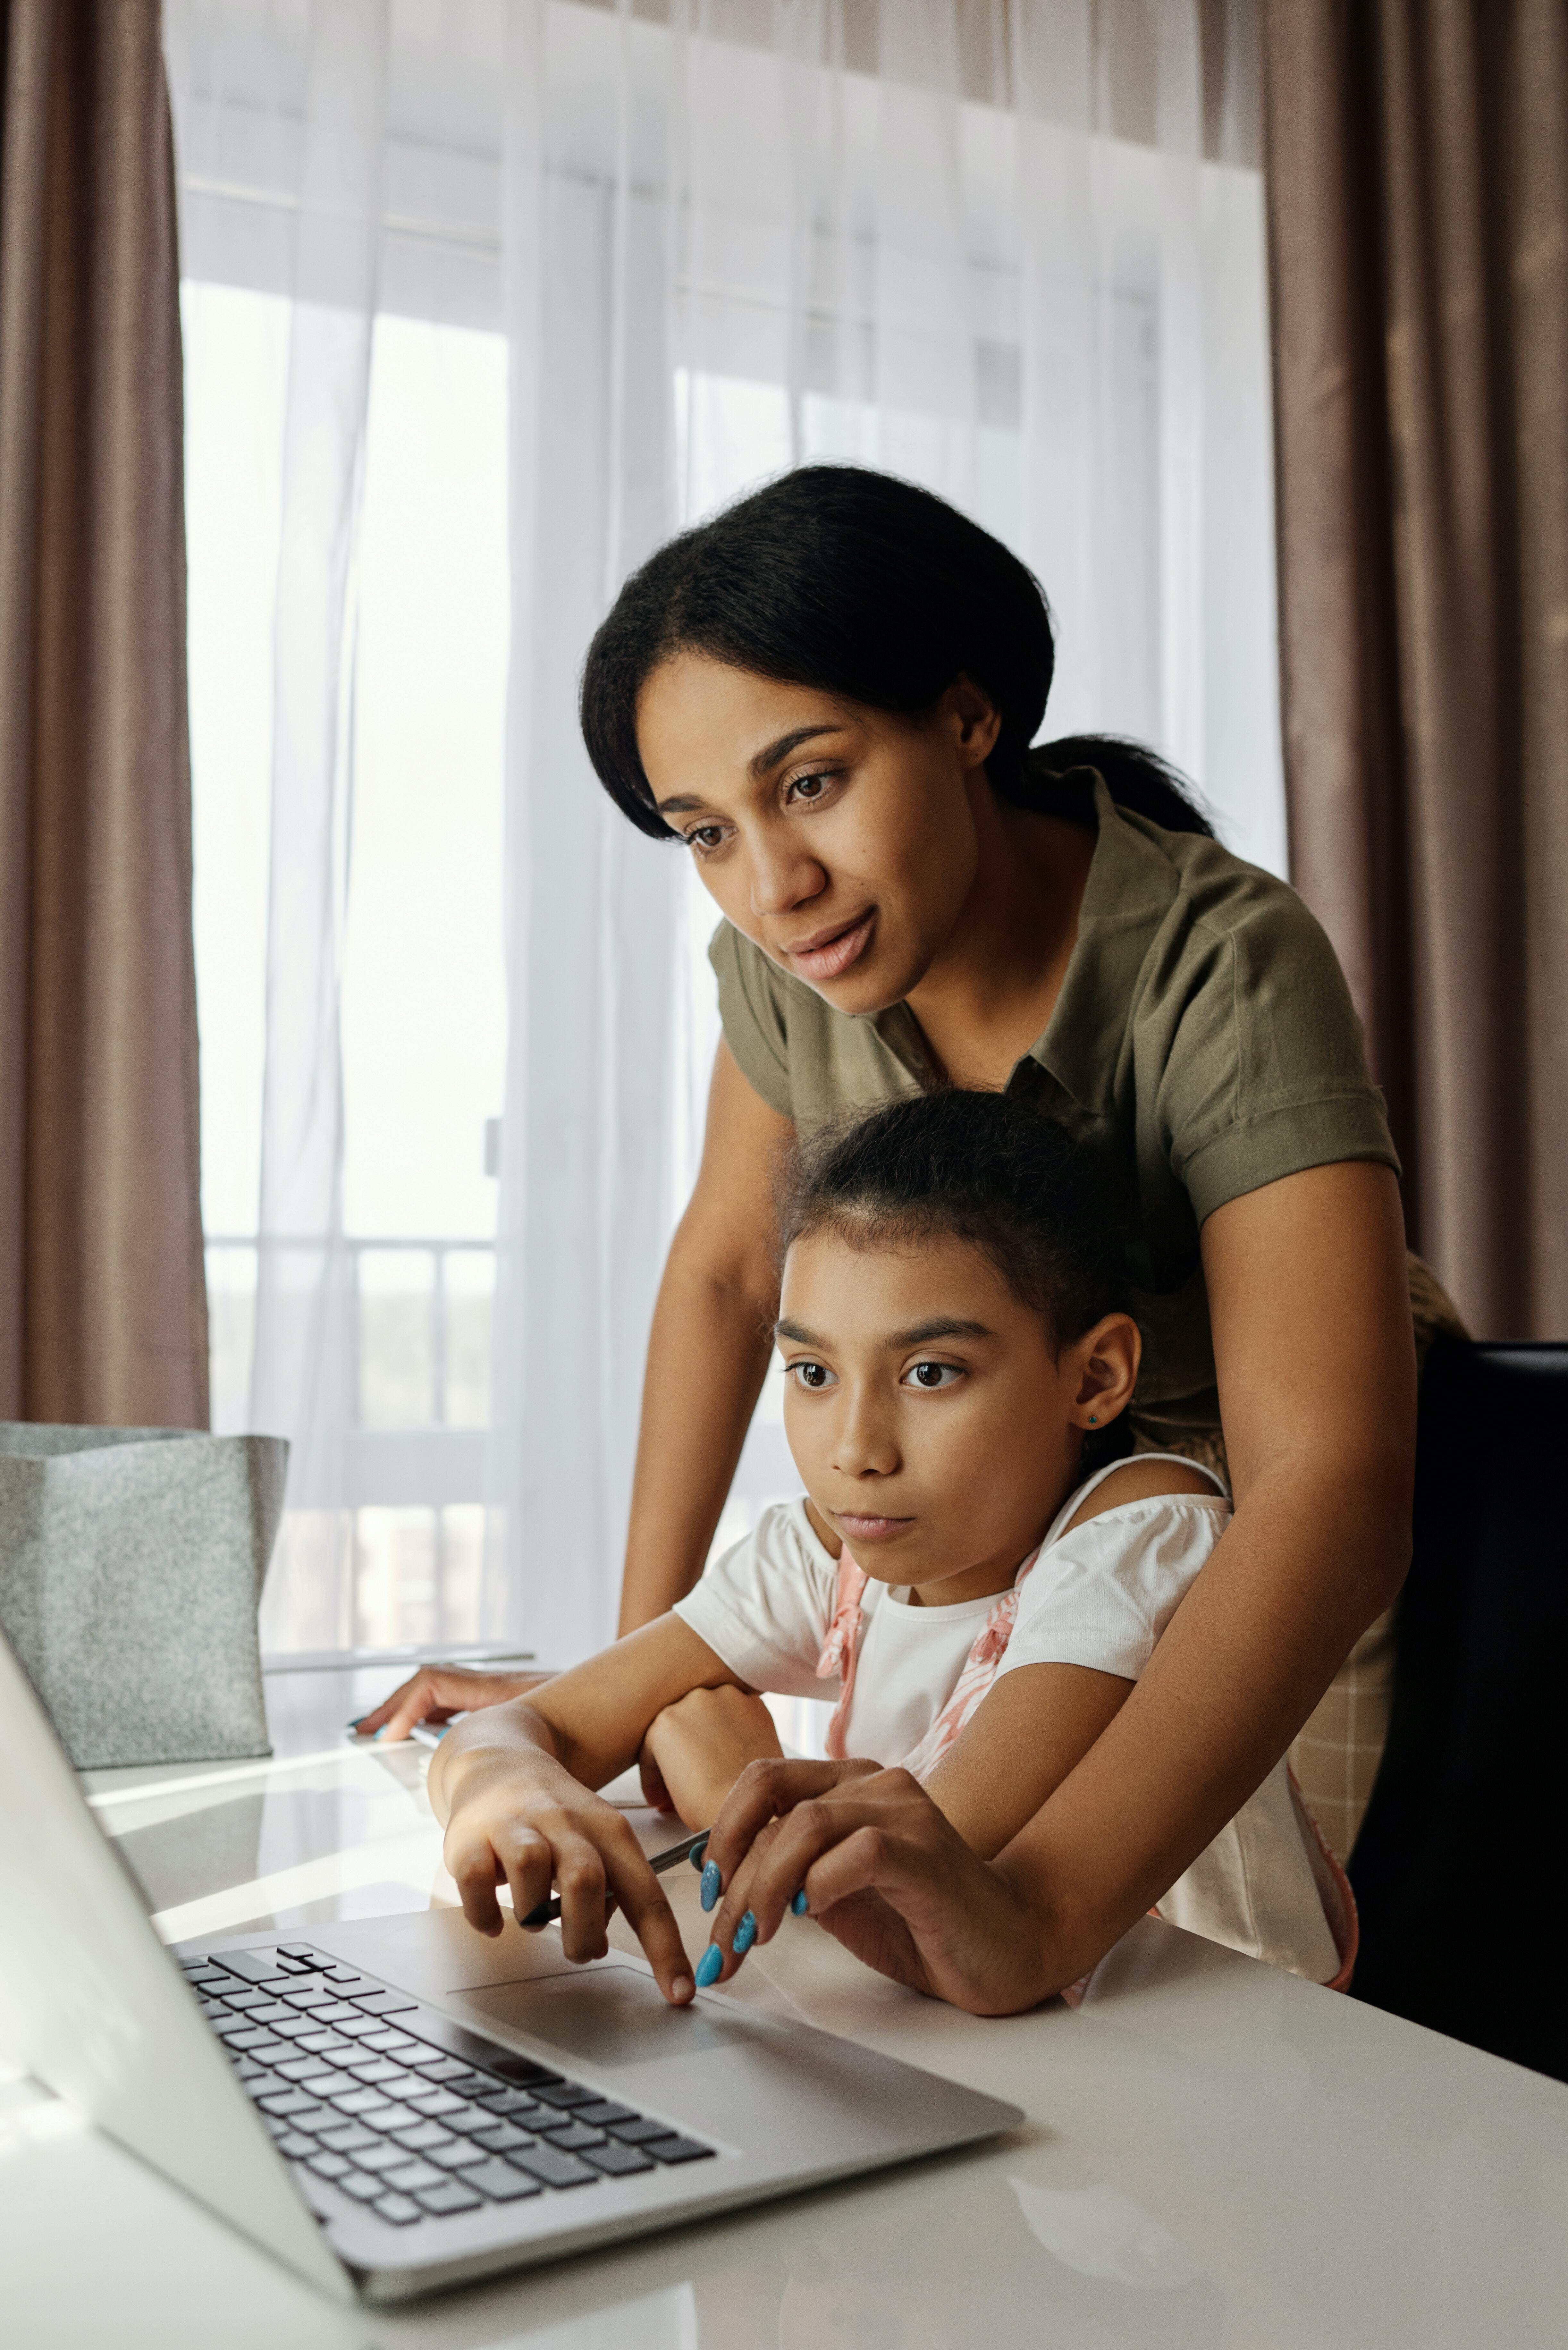 Woman and child using a laptop